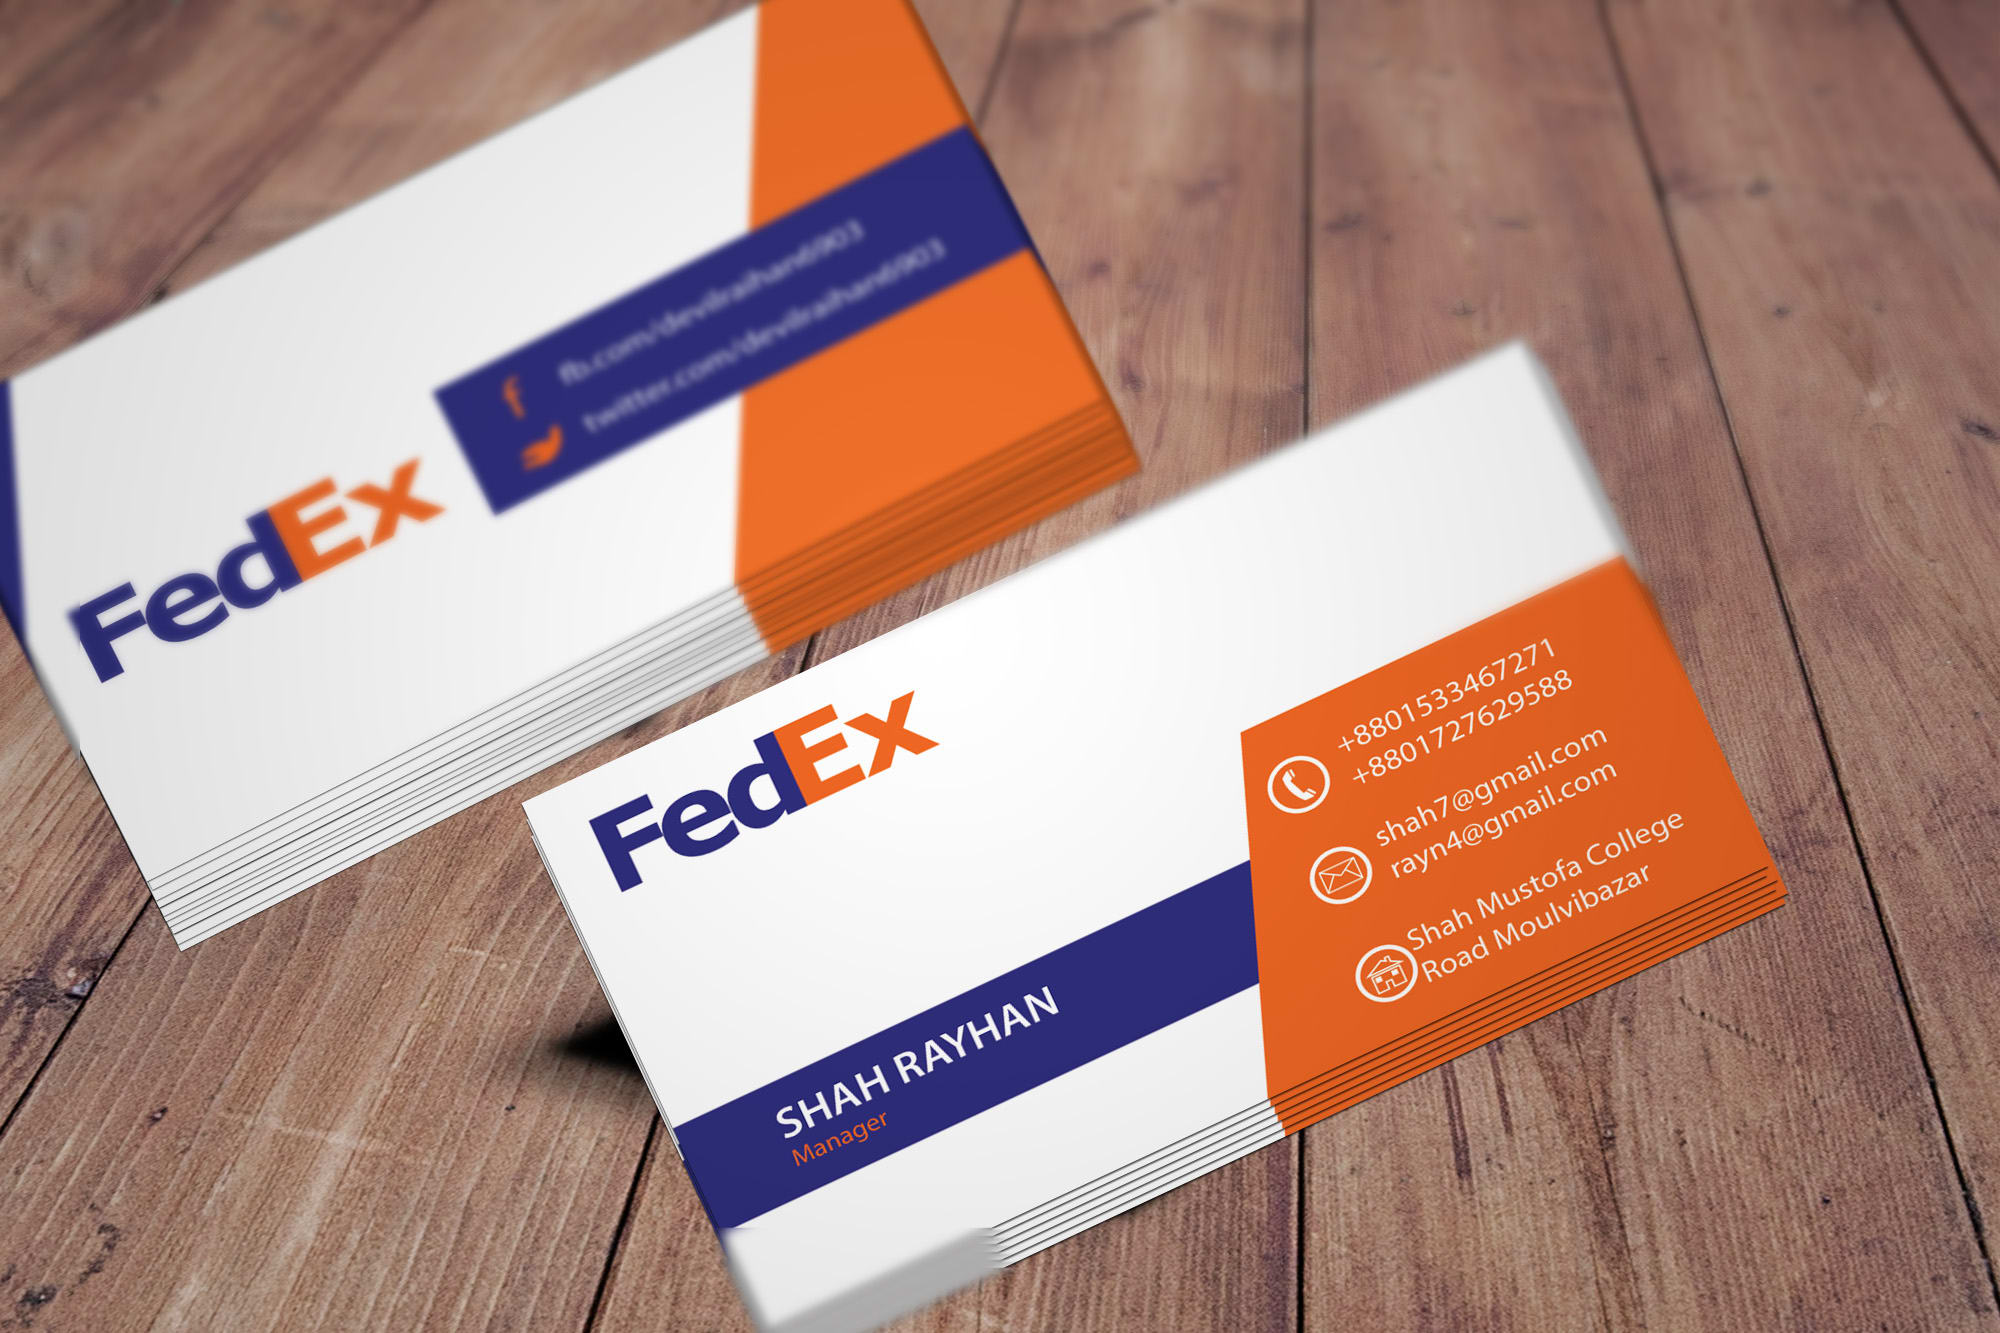 fedex kinkos business cards in store 1